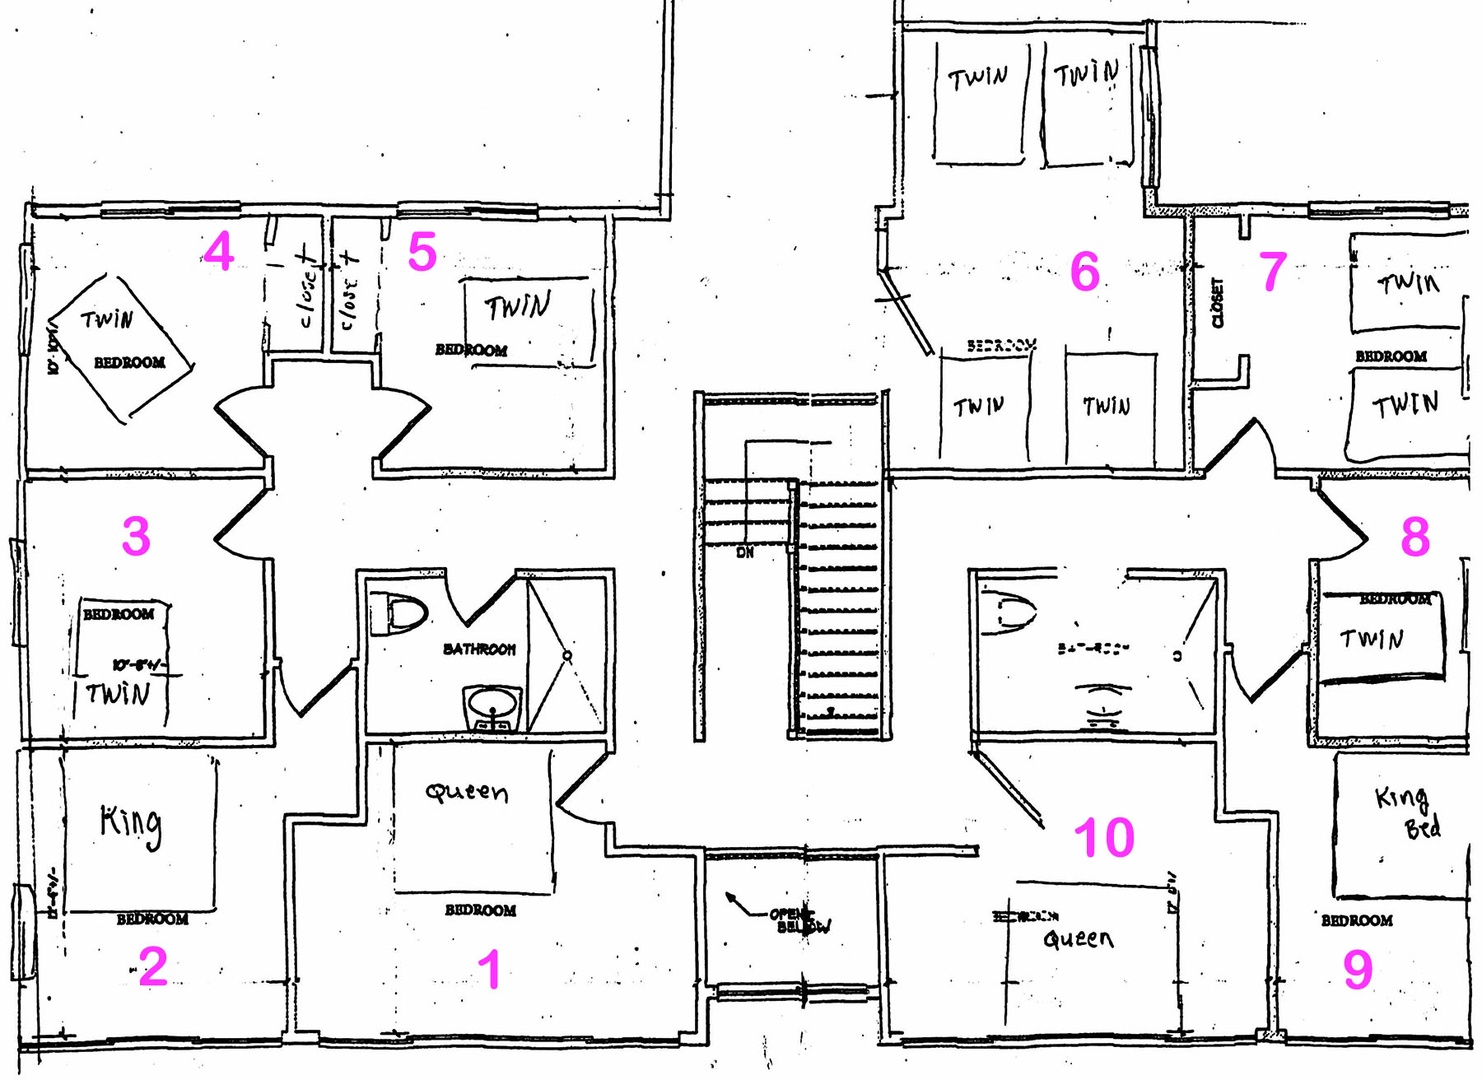 Map of the bedroom layout.